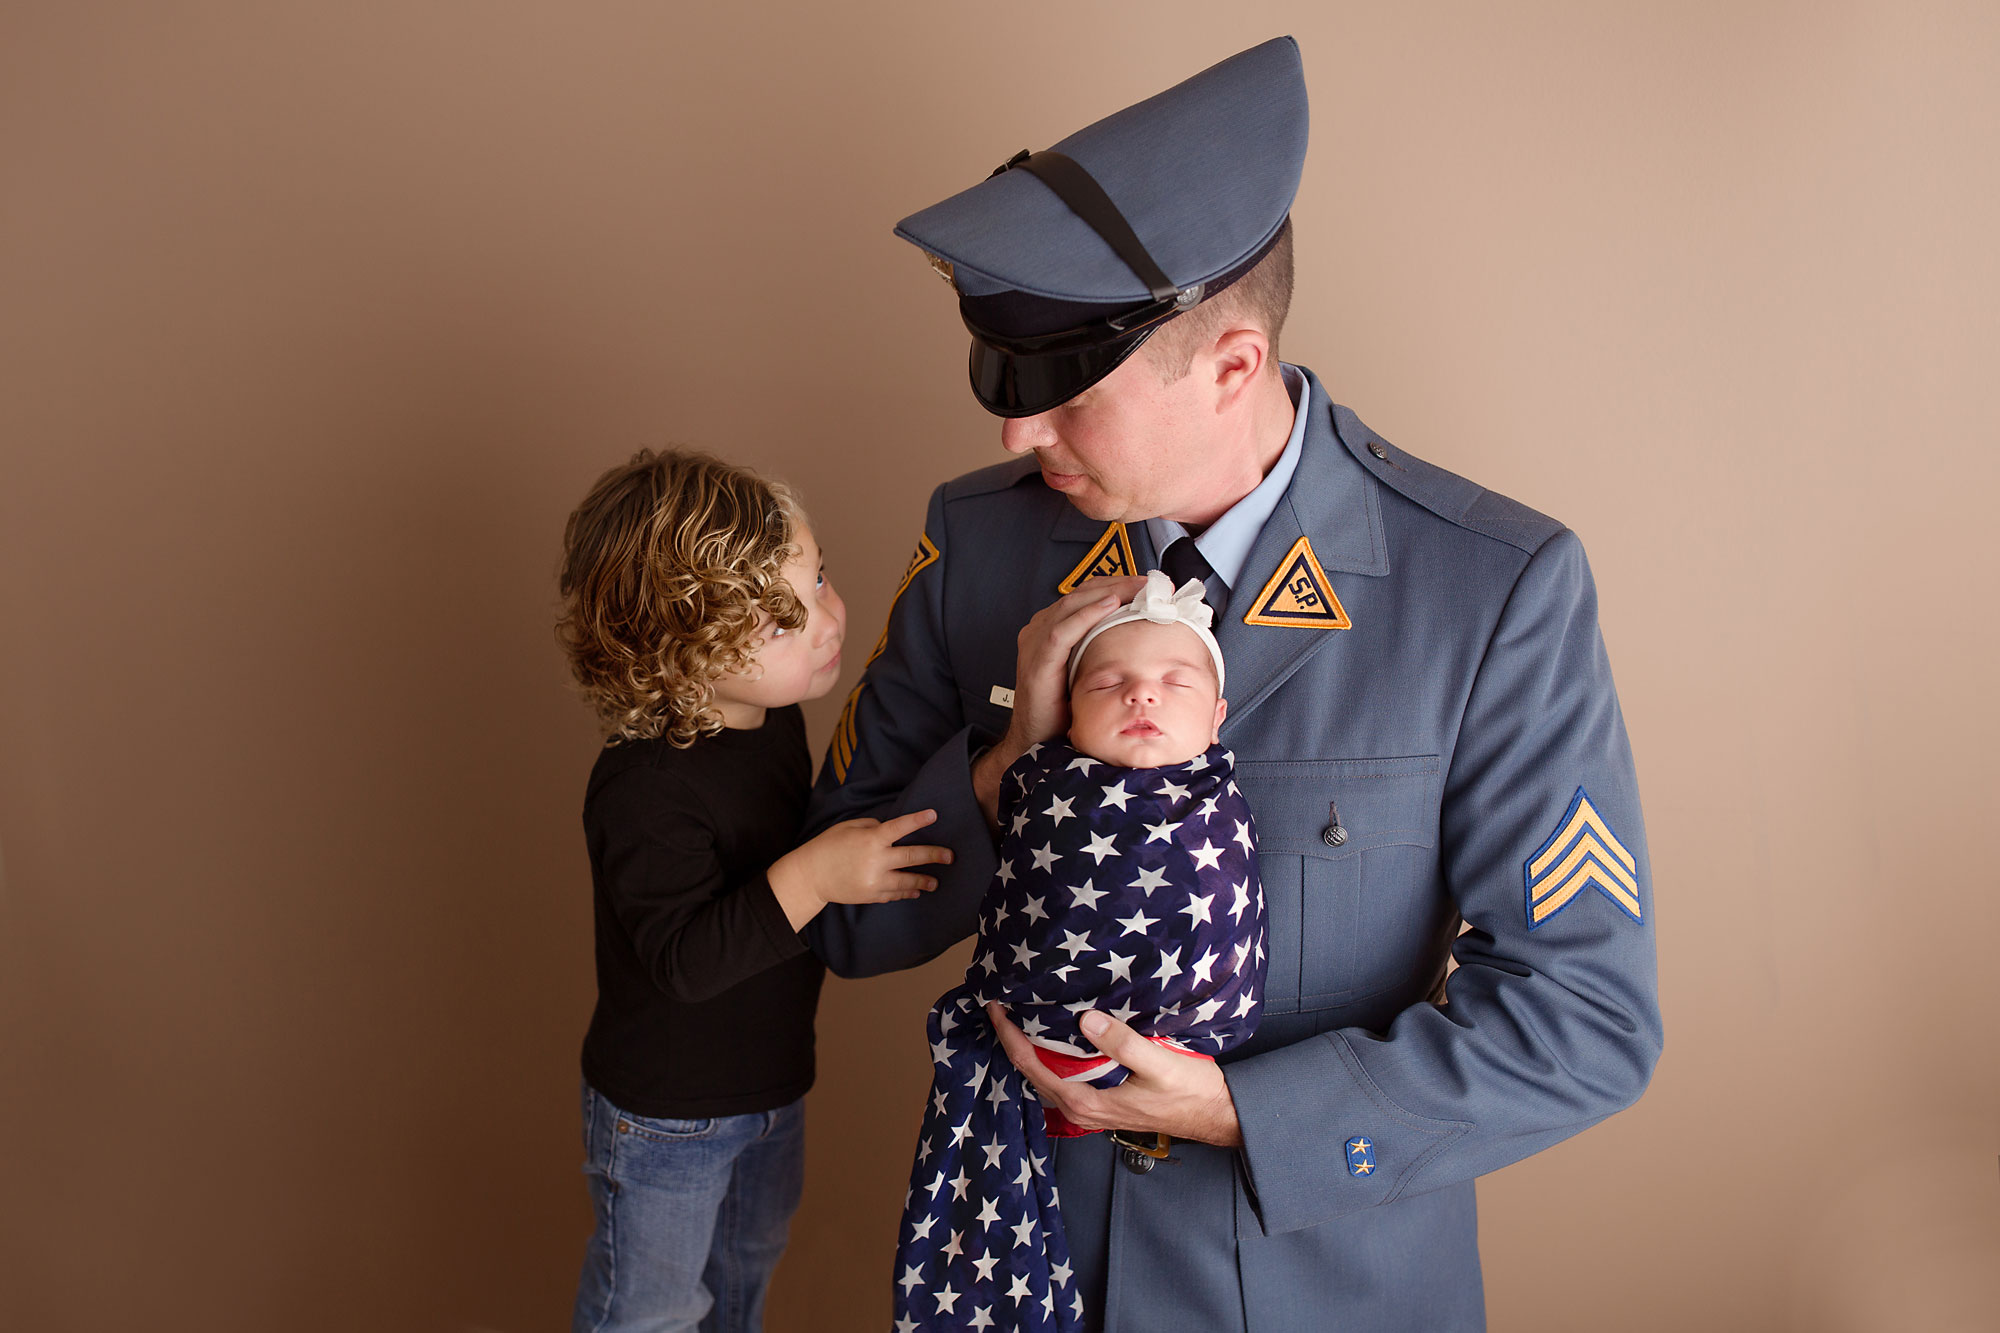 newborn and family photography, baby wrapped in flag being held by dad in uniform